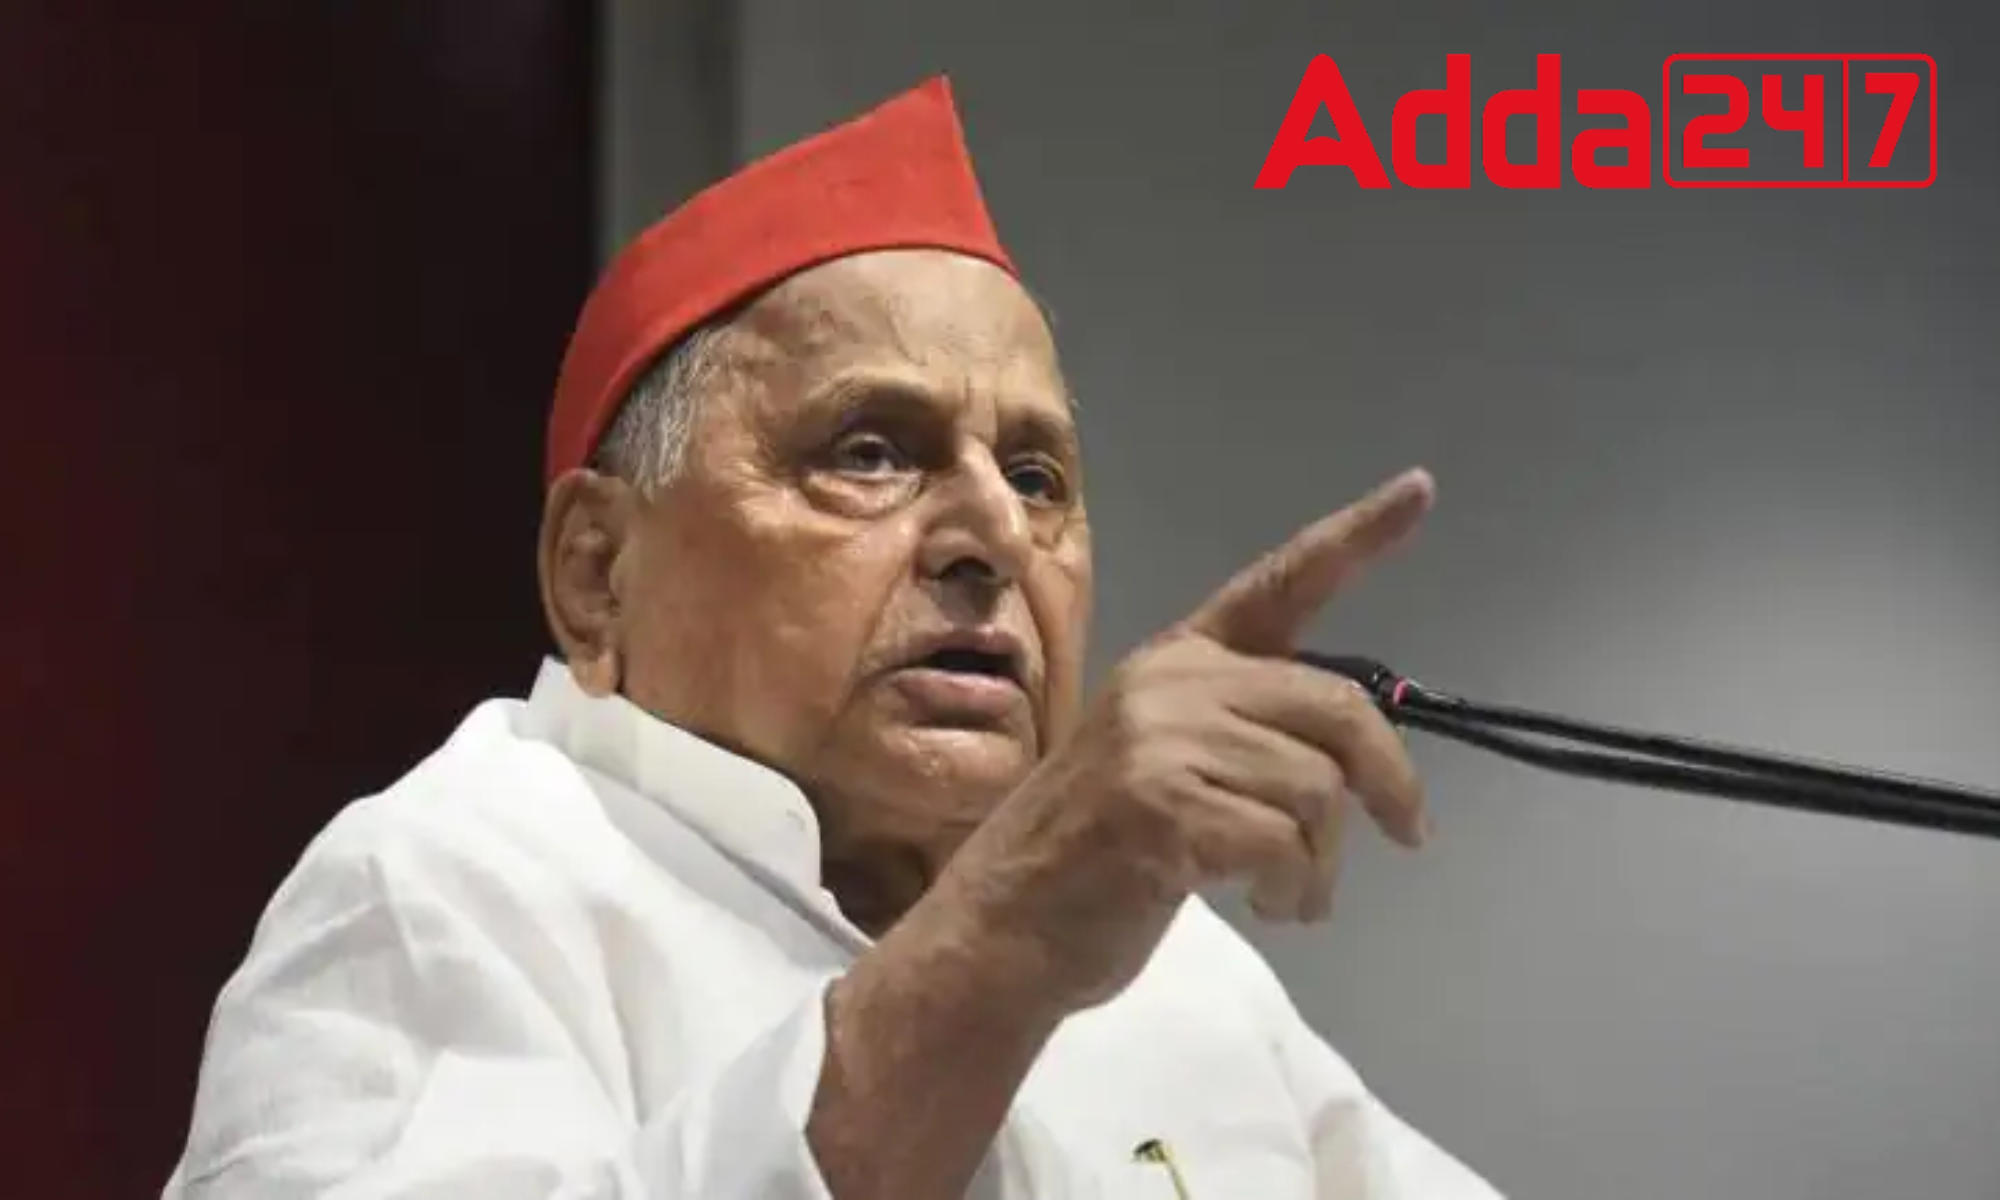 Mulayam Singh Yadav: Founder of SP and Former Chief Minister of U.P passes away_40.1